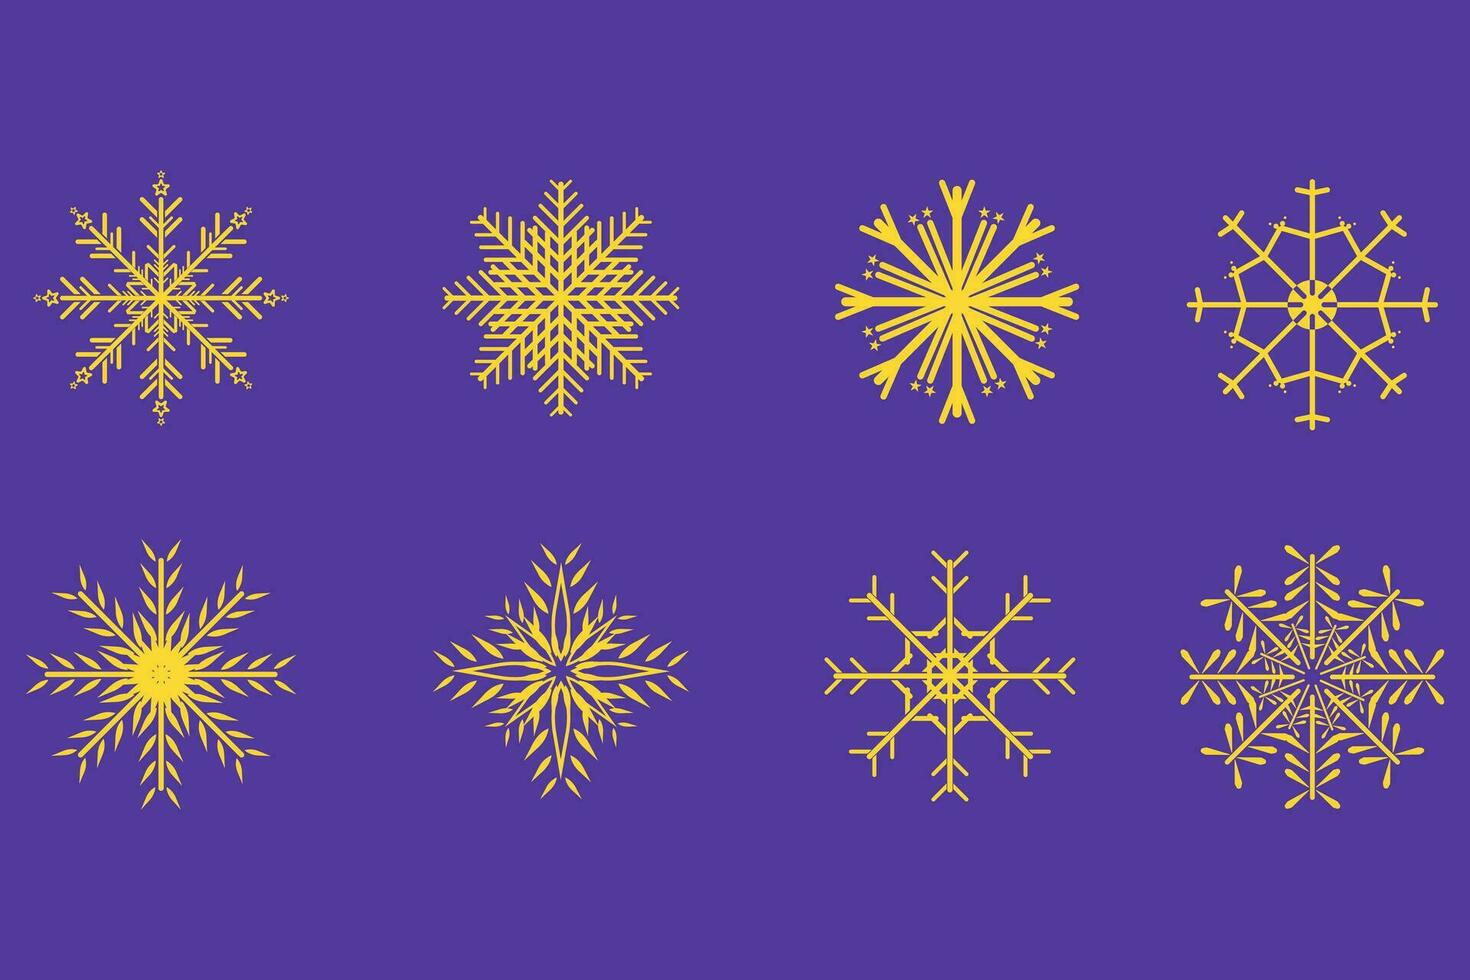 Group of yellow, golden Snowflakes on isolated blue background, Cute snowflakes collection isolated on white background. Flat snow icons templates vector